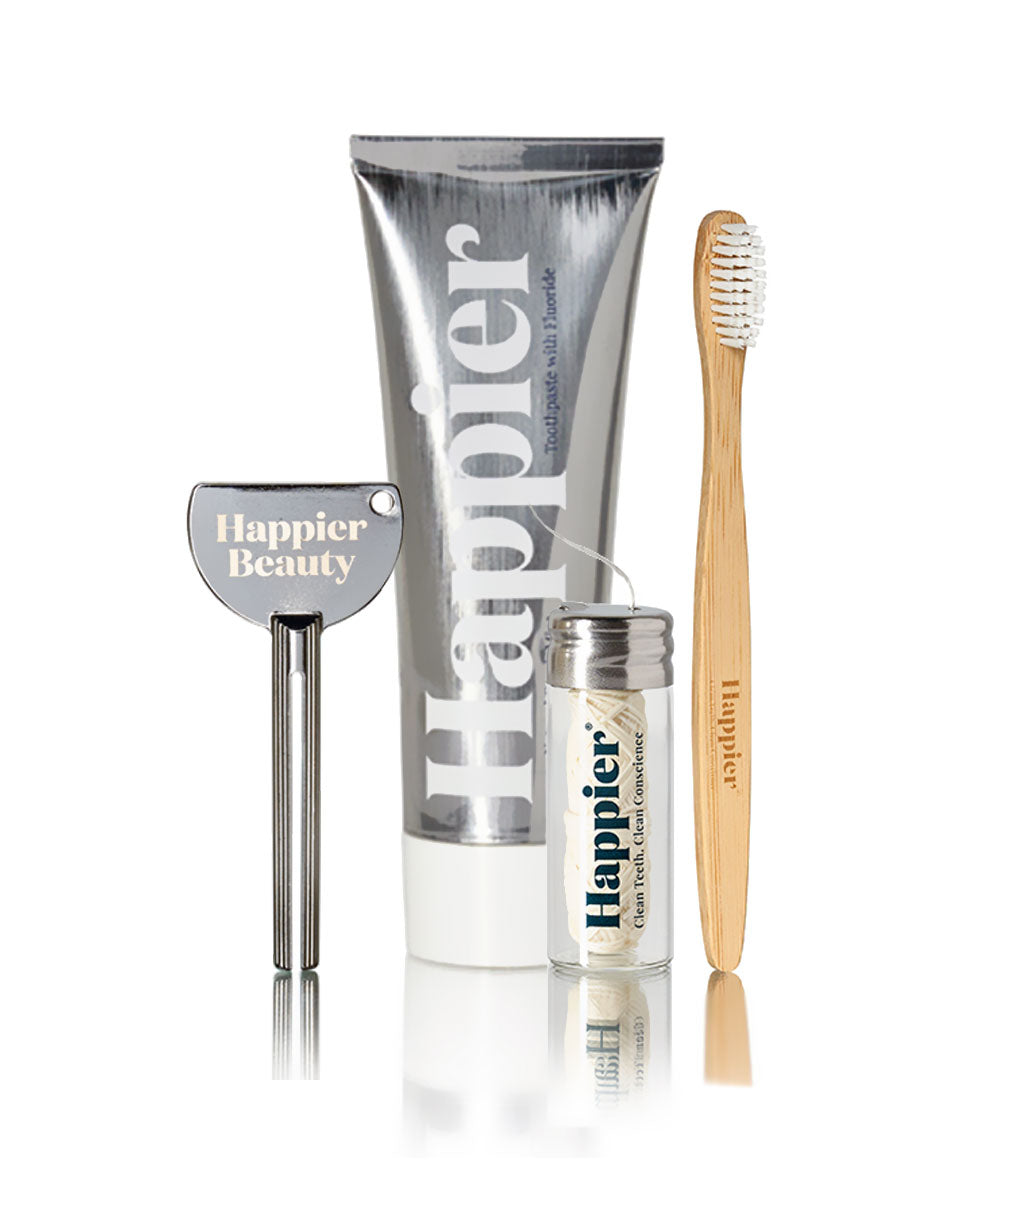 Happier Dental hygiene essentials: Bamboo toothbrush, Happier toothpaste, squeeze ksy and floss.